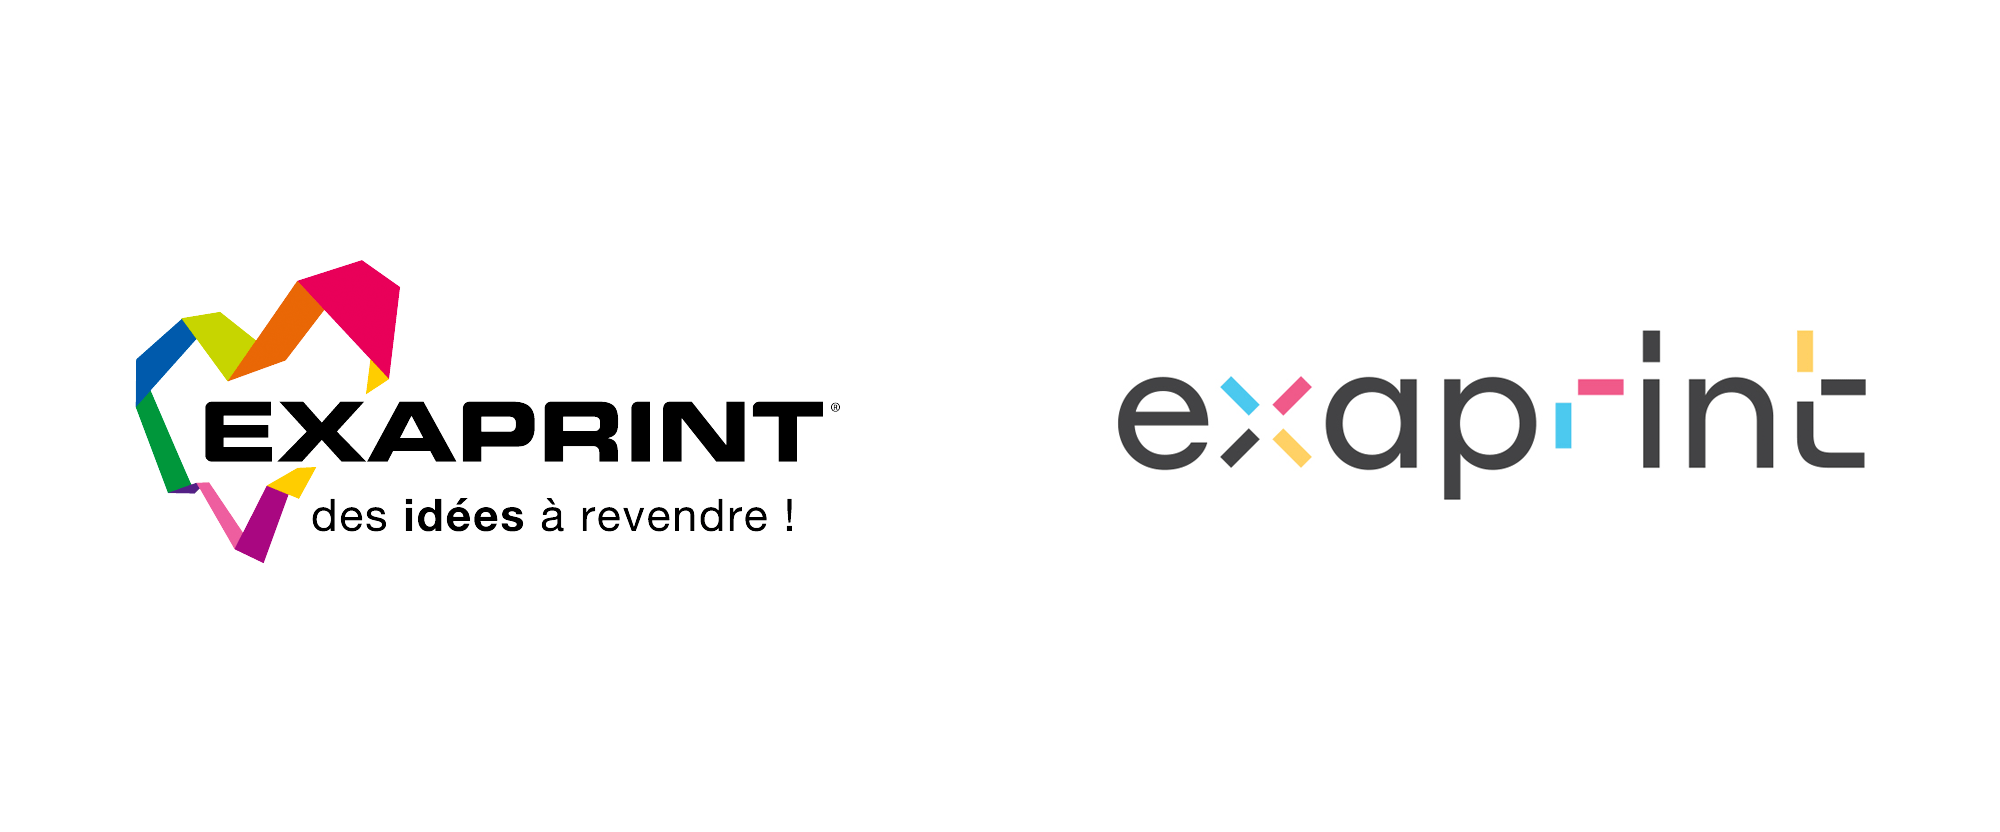 New Logo for Exaprint